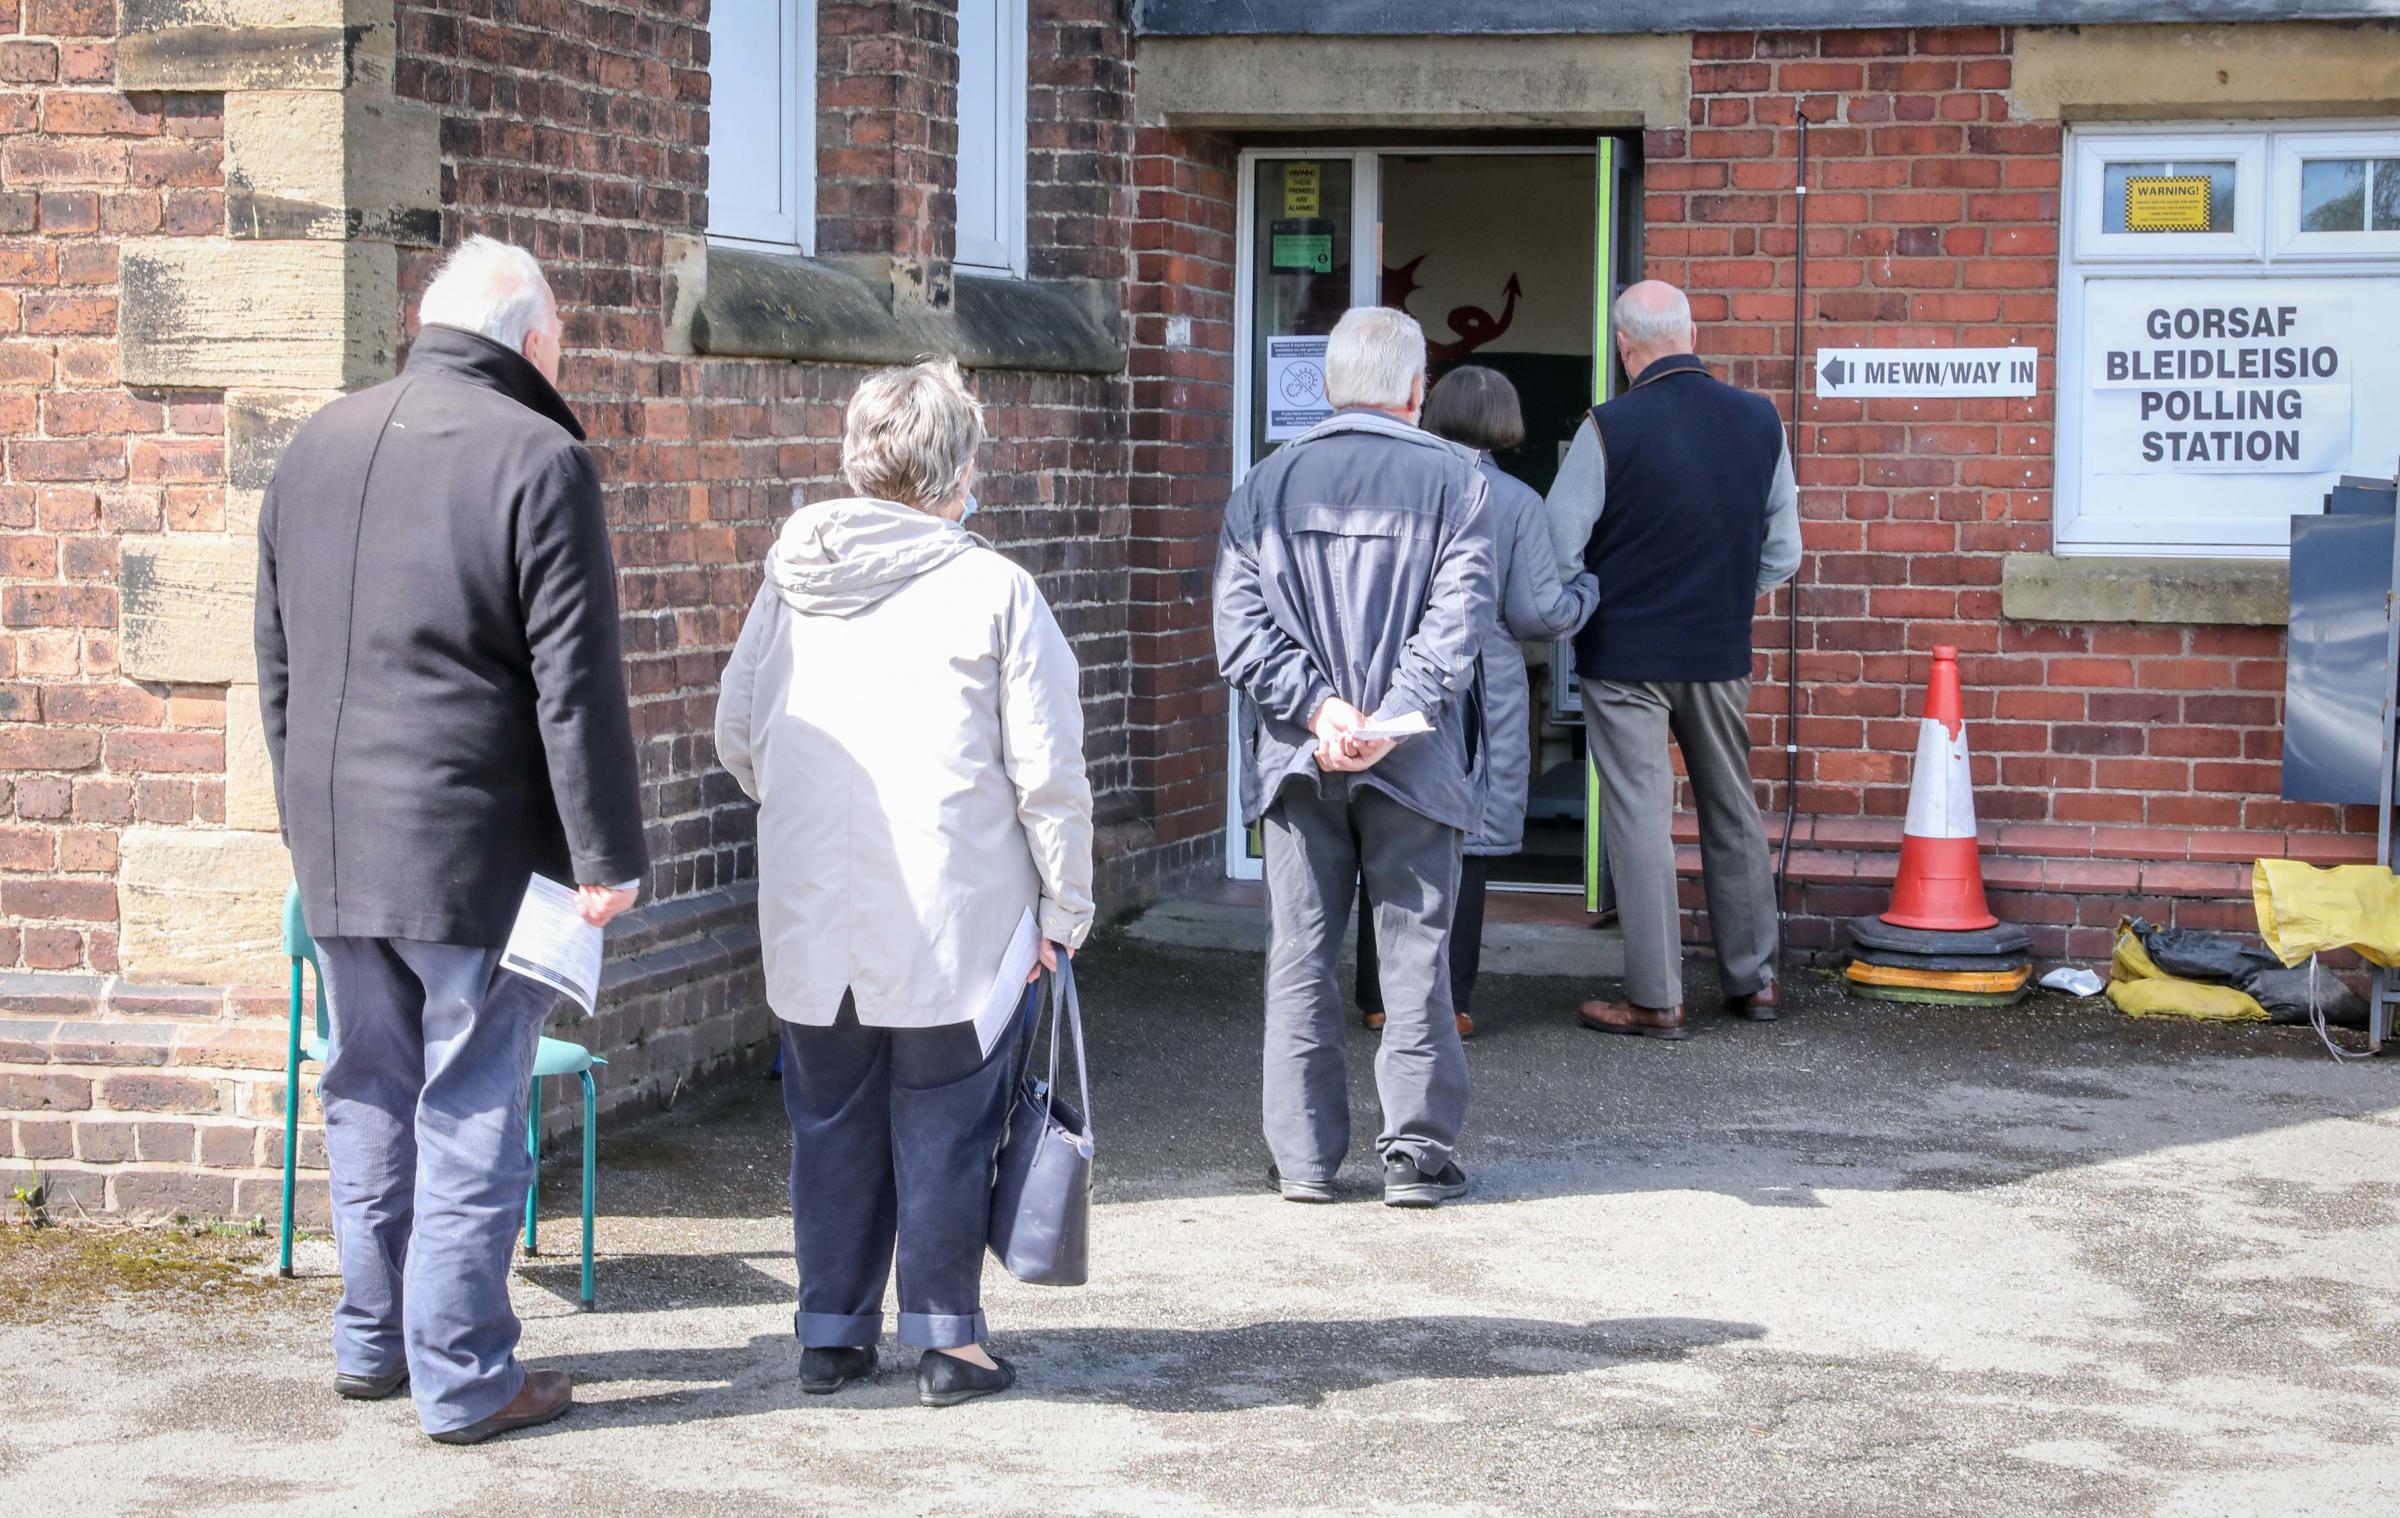 Penyfford Youth and Community Centre Queue to vote